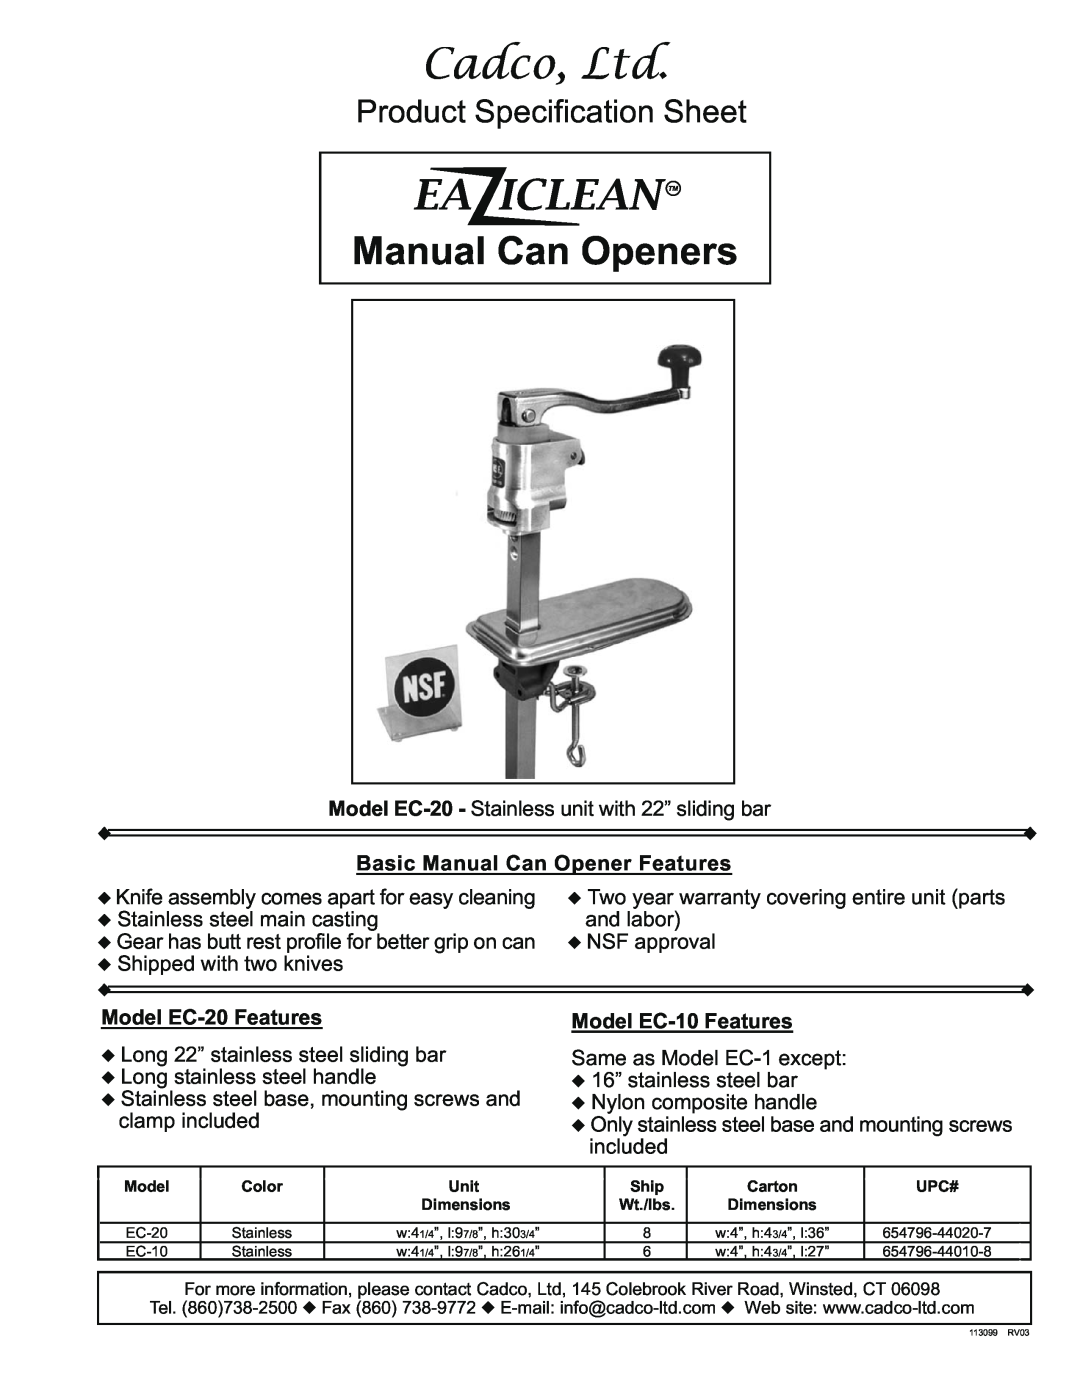 Cadco EC-10 specifications Ea Iclean Tm, Manual Can Openers, Product Specification Sheet, Basic Manual Can Opener Features 